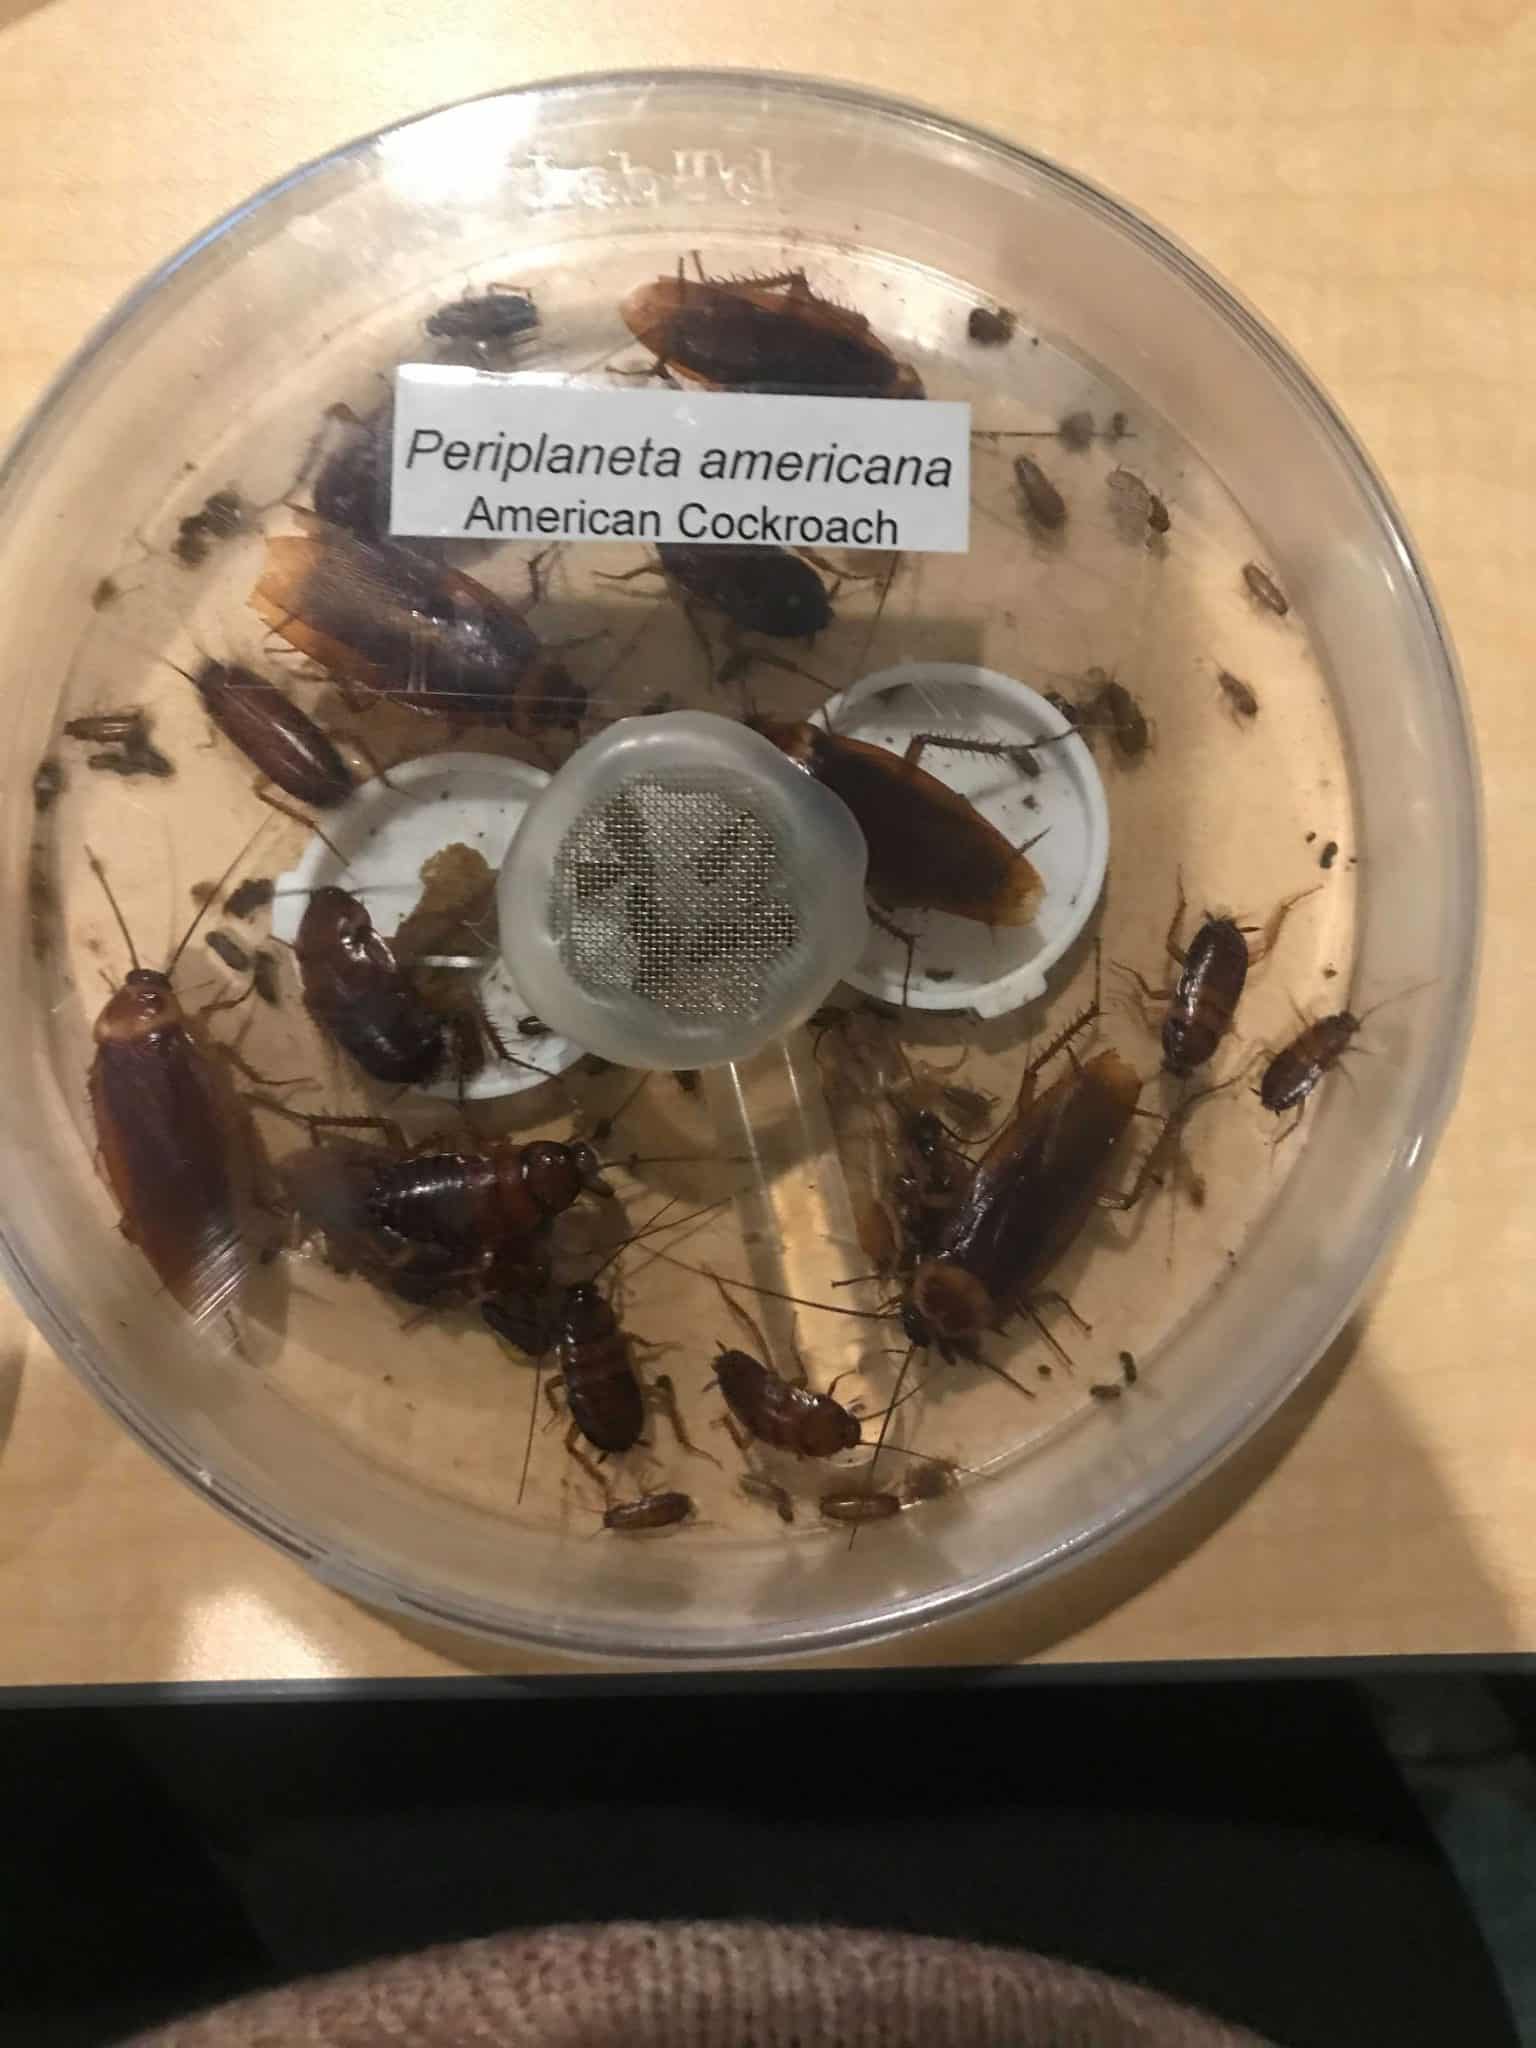 Various roaches in a container.